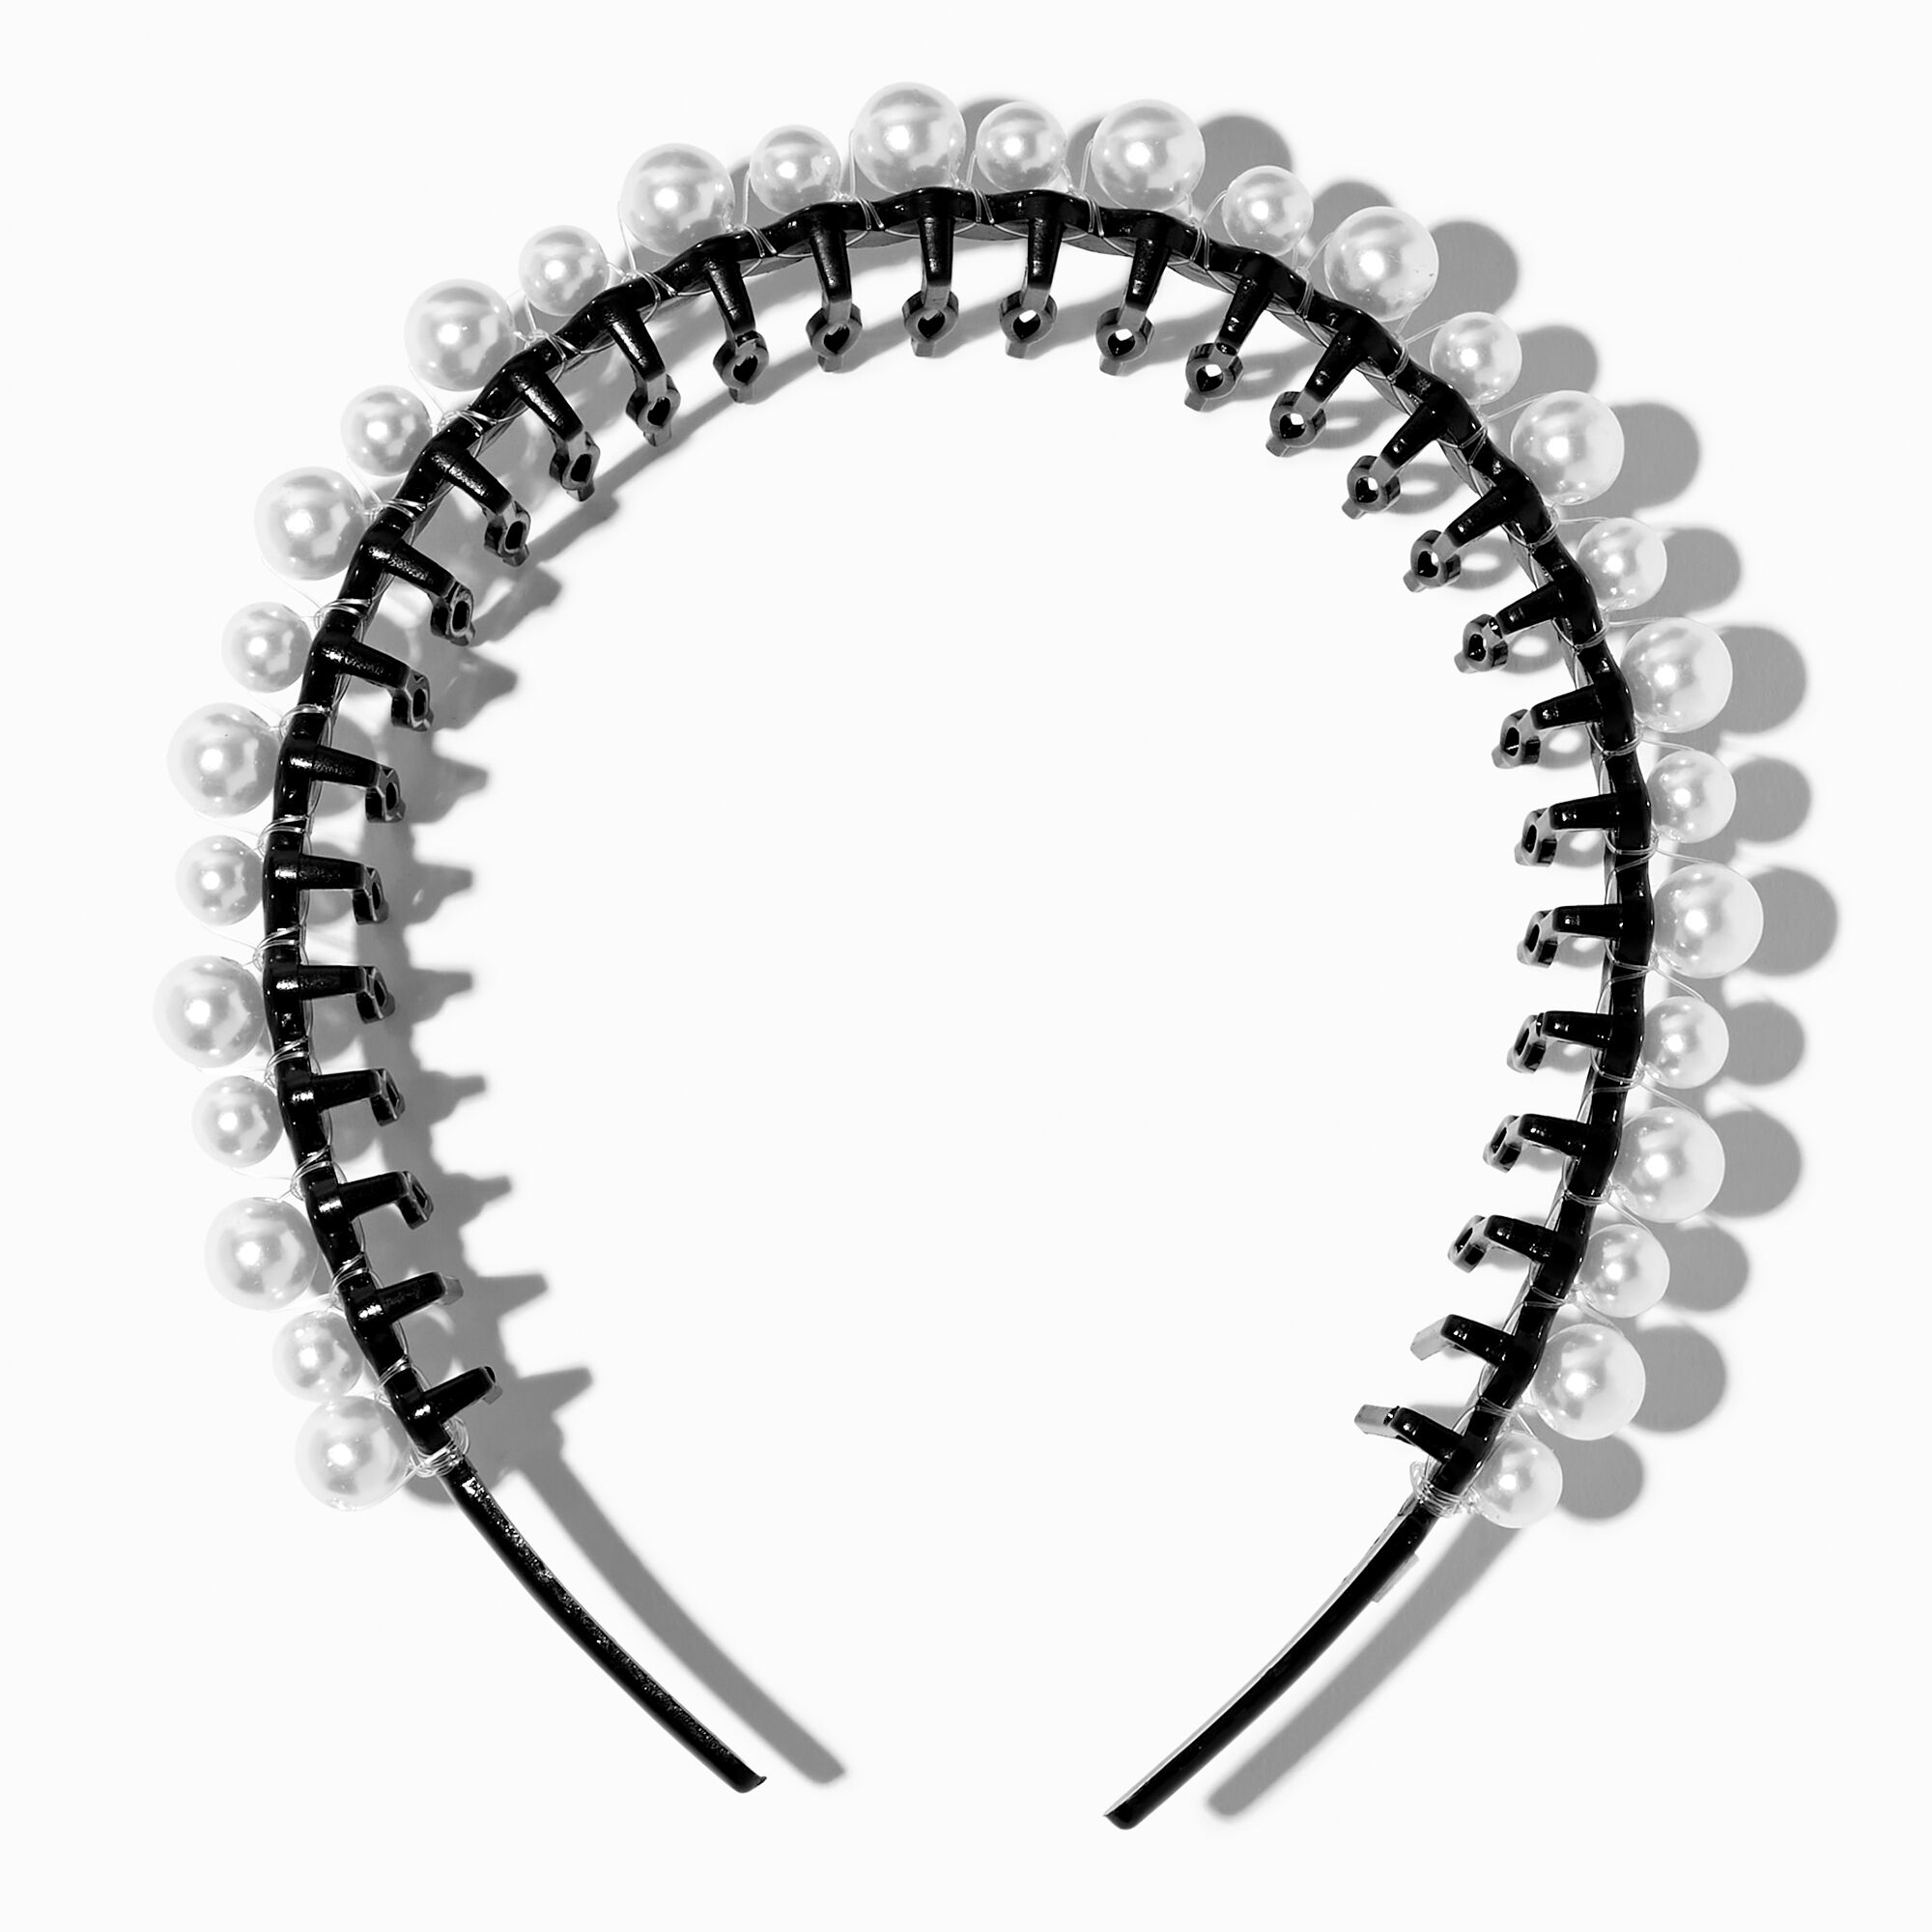 View Claires Pearl Black Spiked Headband White information